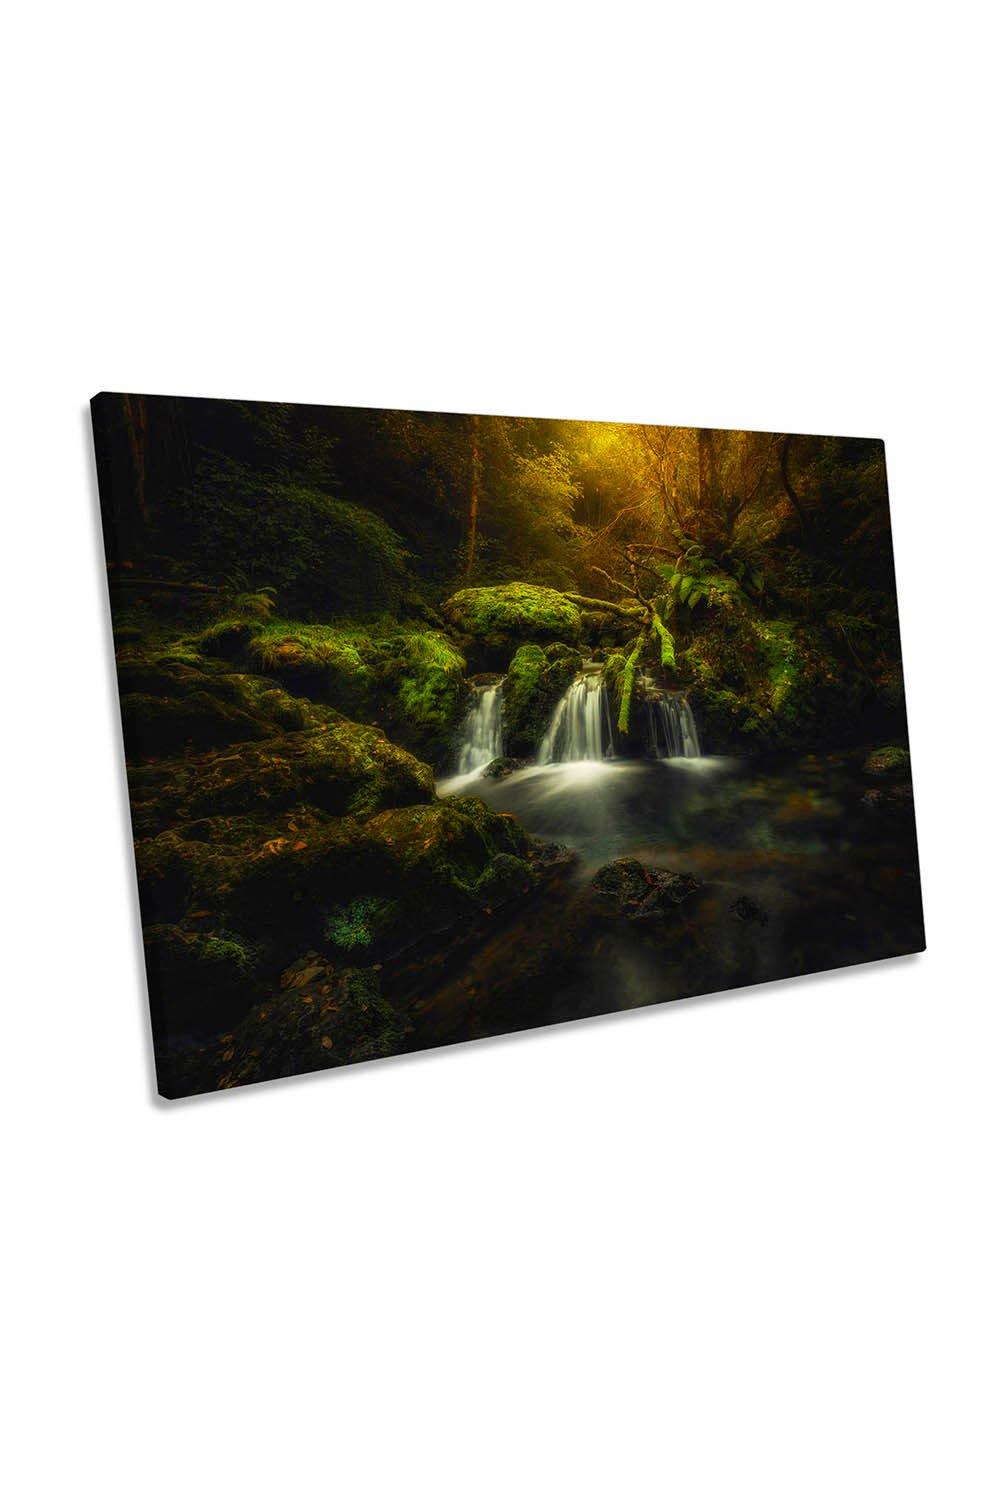 Green Forest Waterfall River Landscape Canvas Wall Art Picture Print